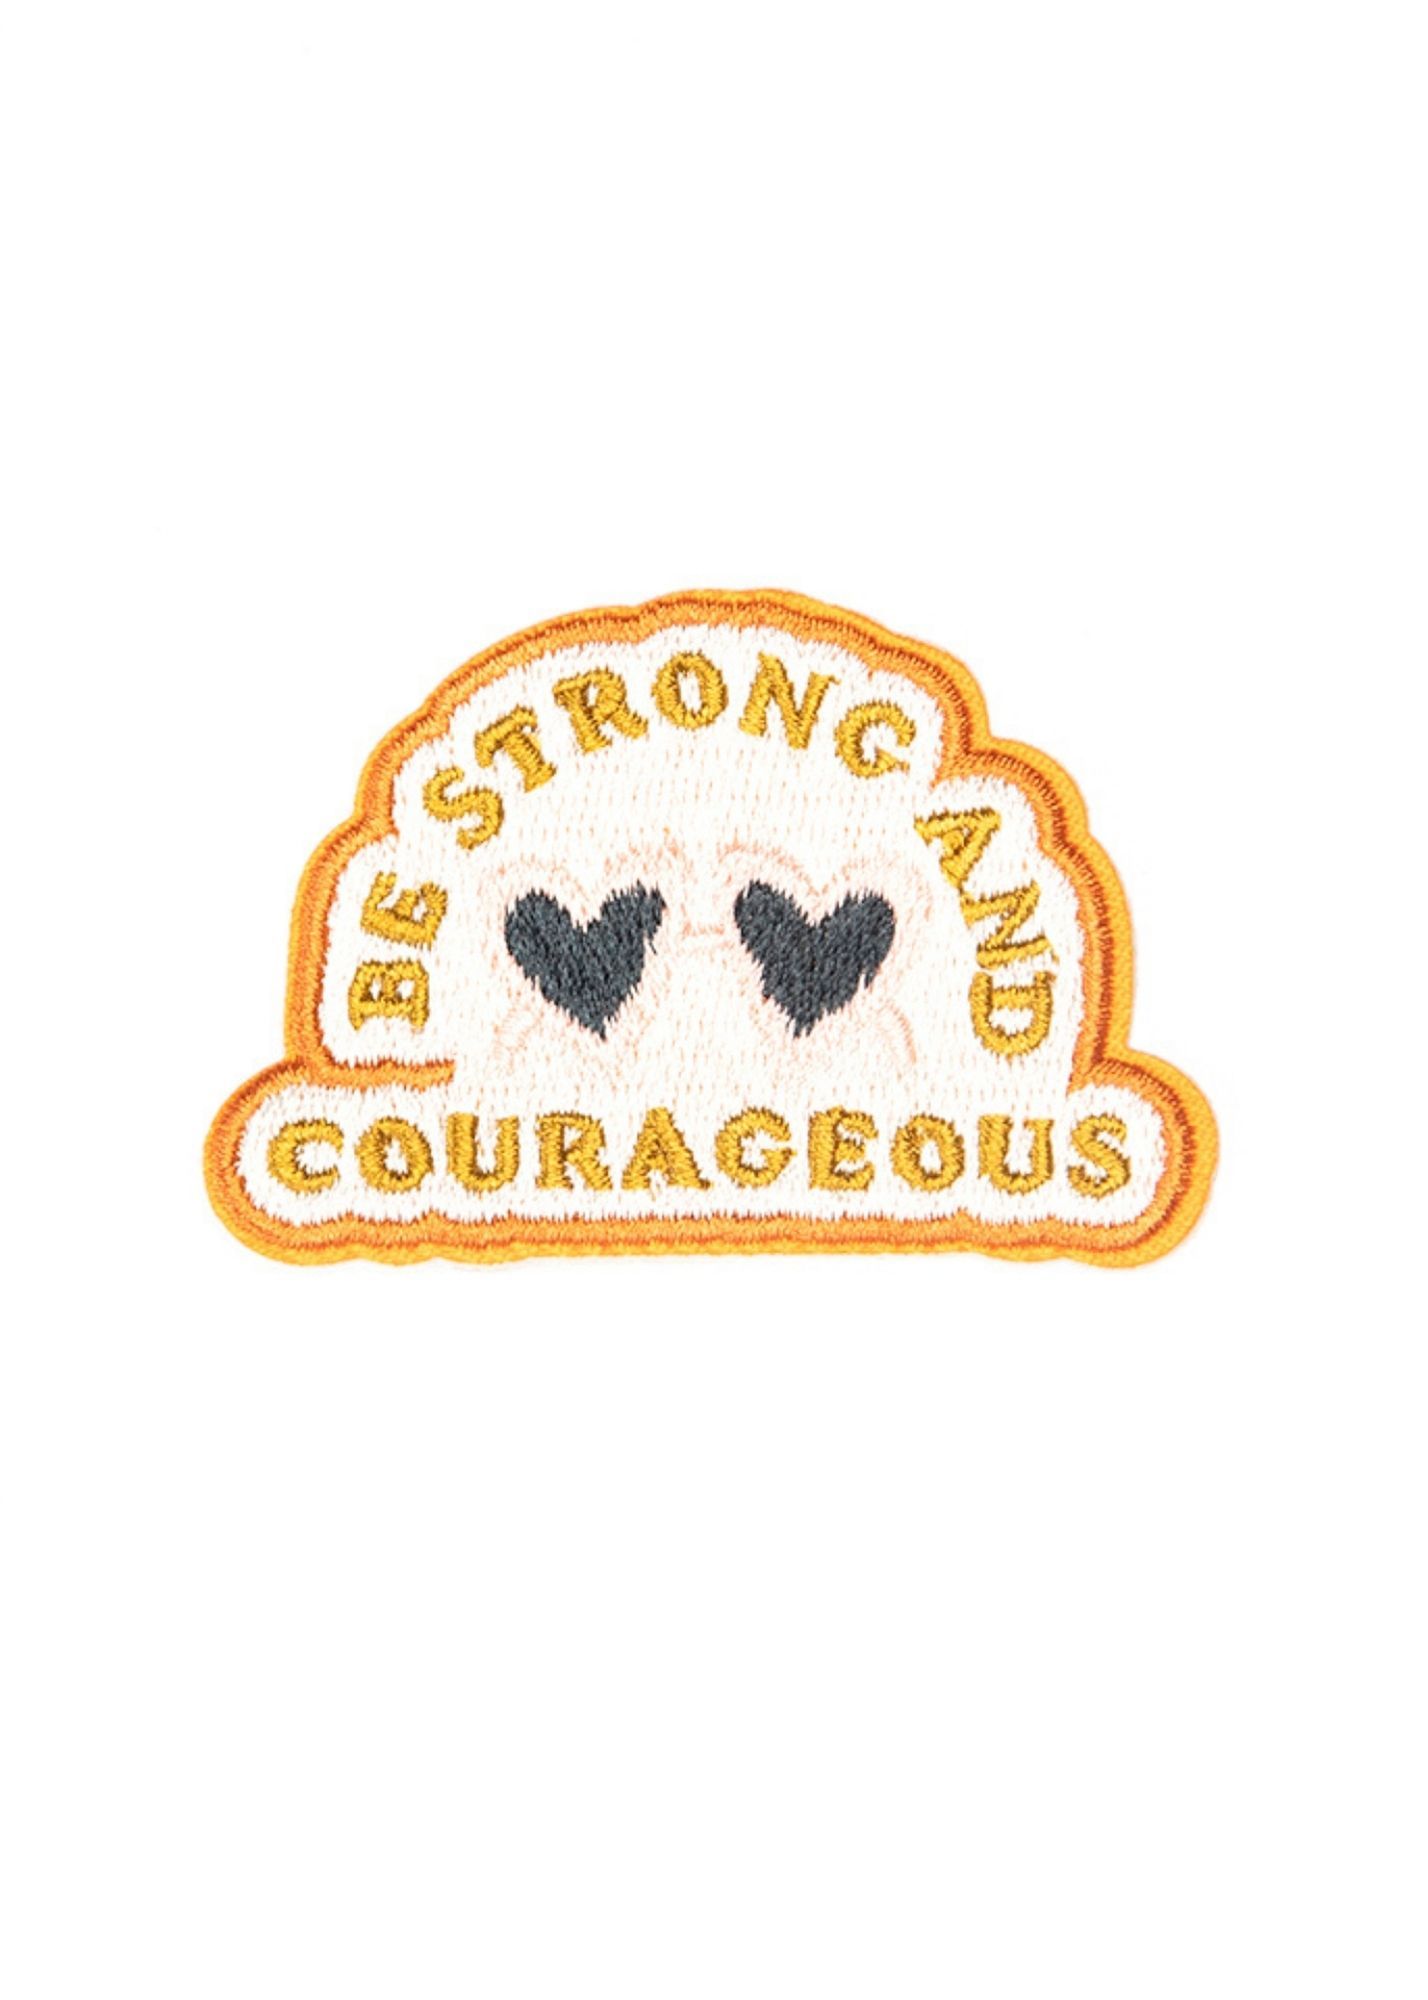 Encouraging Iron-on Patch Home & Lifestyle Inherit Co.